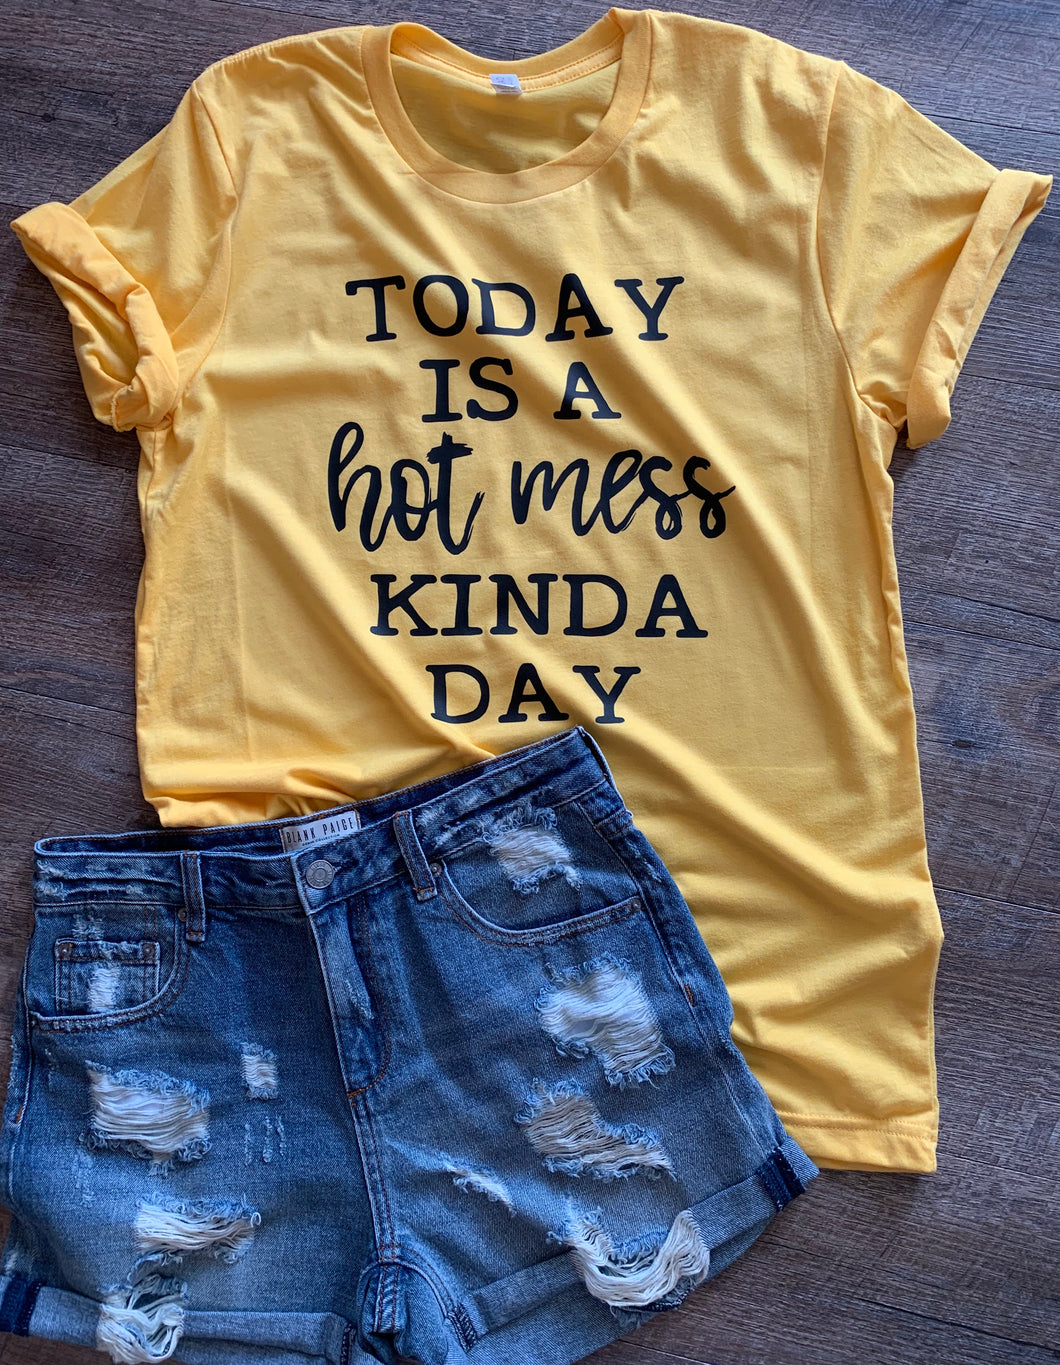 Today is a hot mess kinda day. Funny graphic tee - Mavictoria Designs Hot Press Express